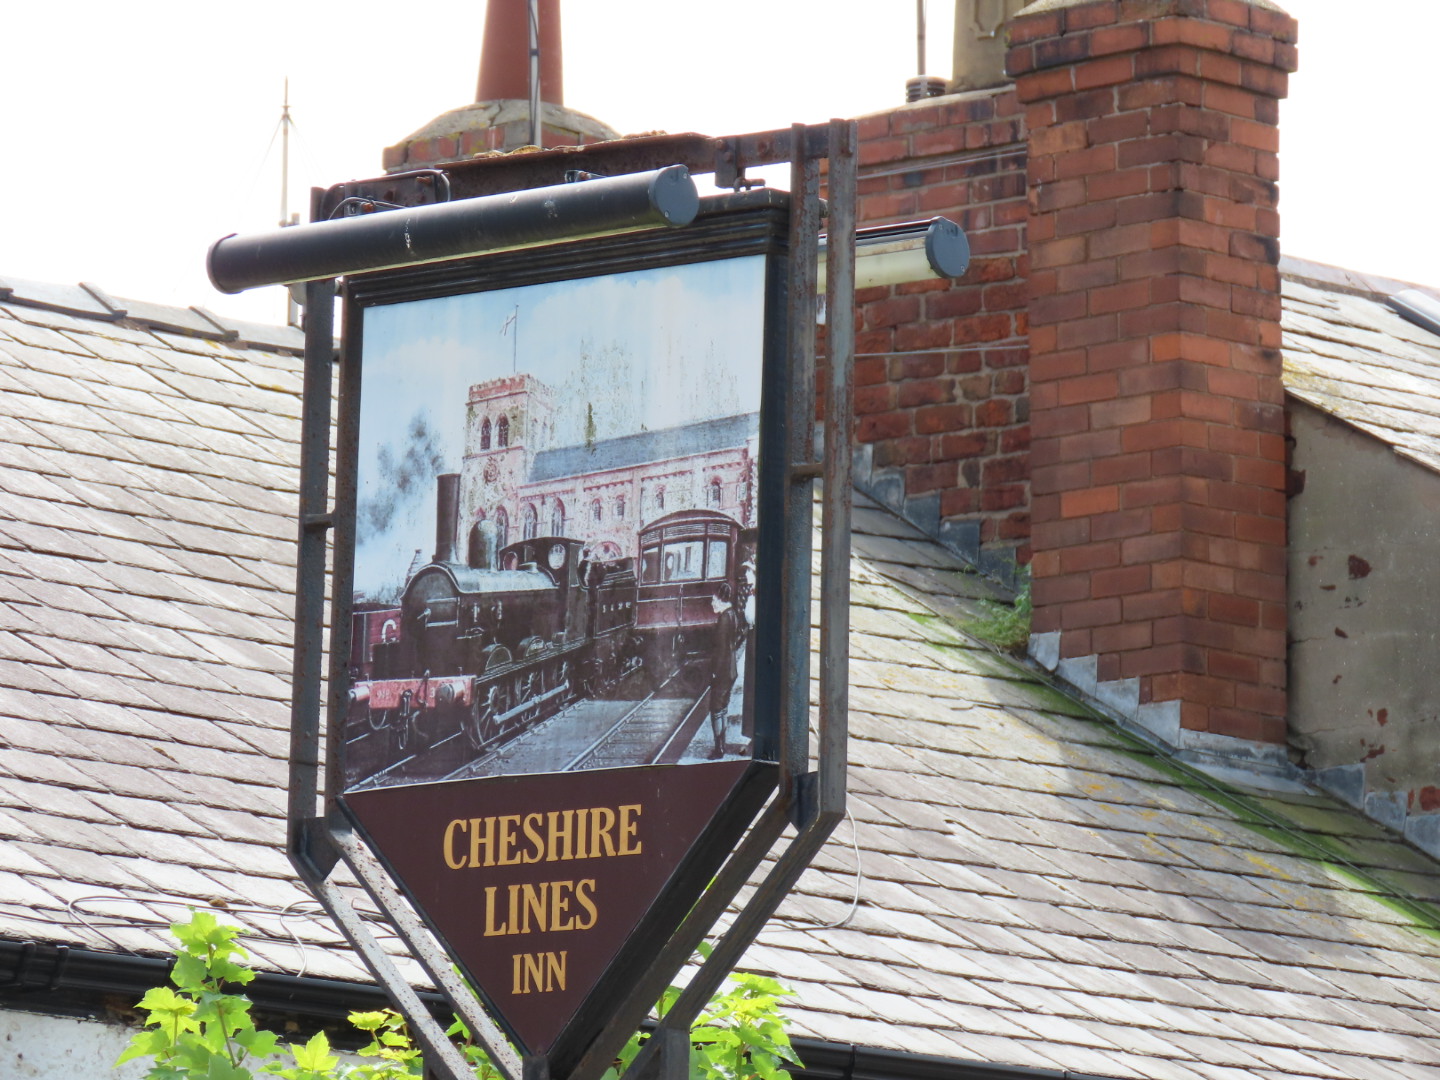 The Cheshire Lines Inn pub in Southport. Photo by Andrew Brown Media